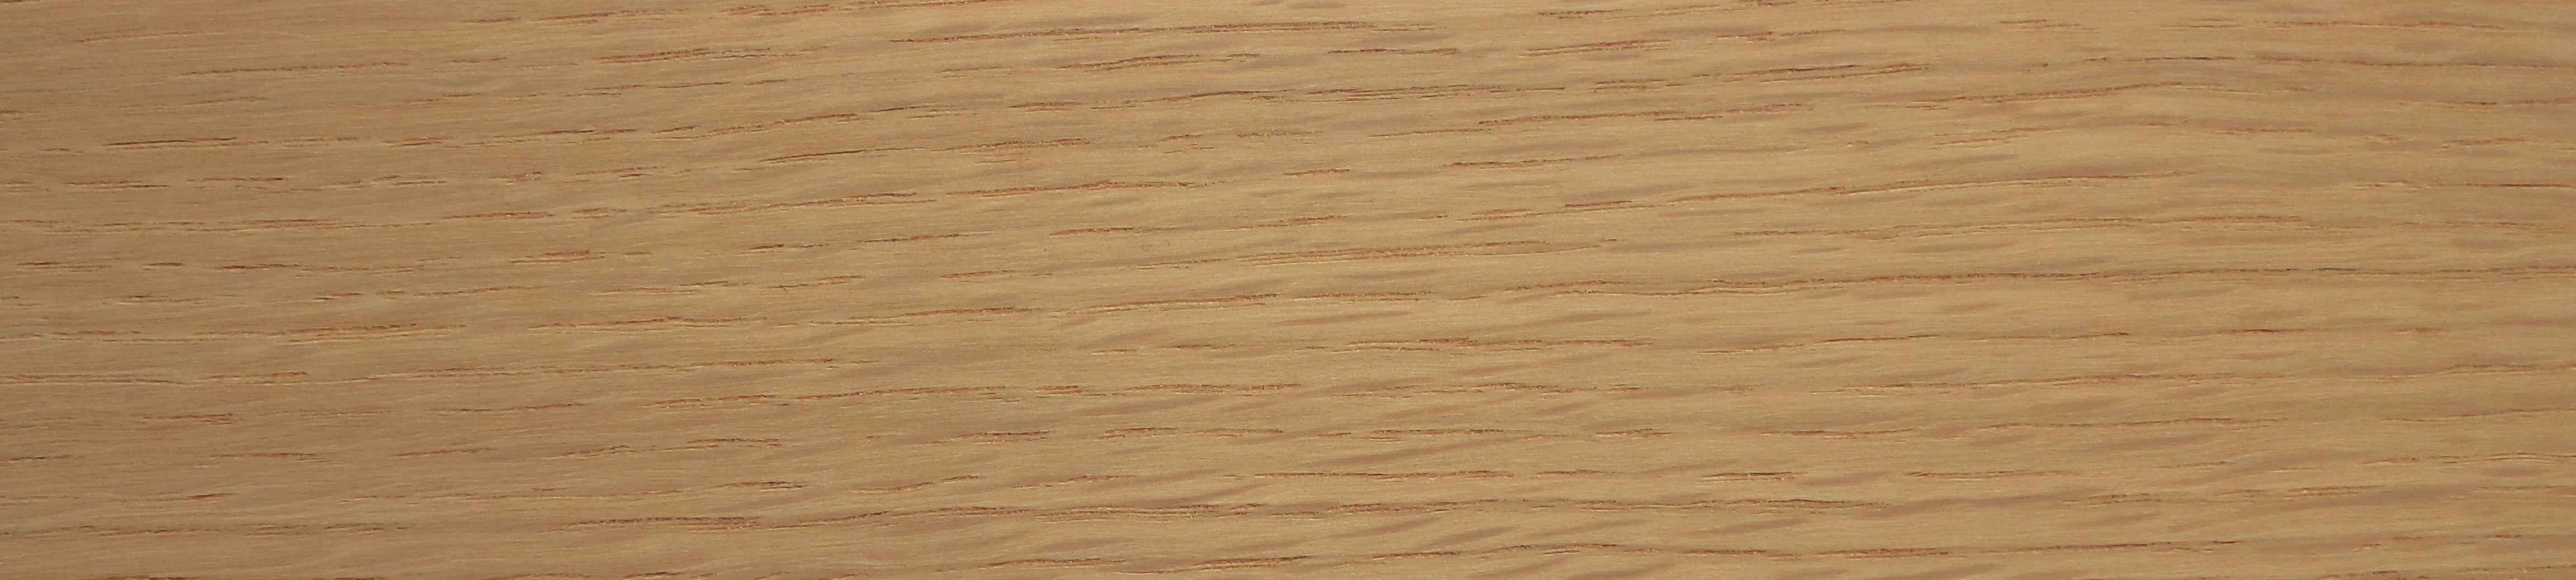 American White Oak Thickwood Unglued Edging / Lipping 22mm x 1mm Thick Oak Wood Edging